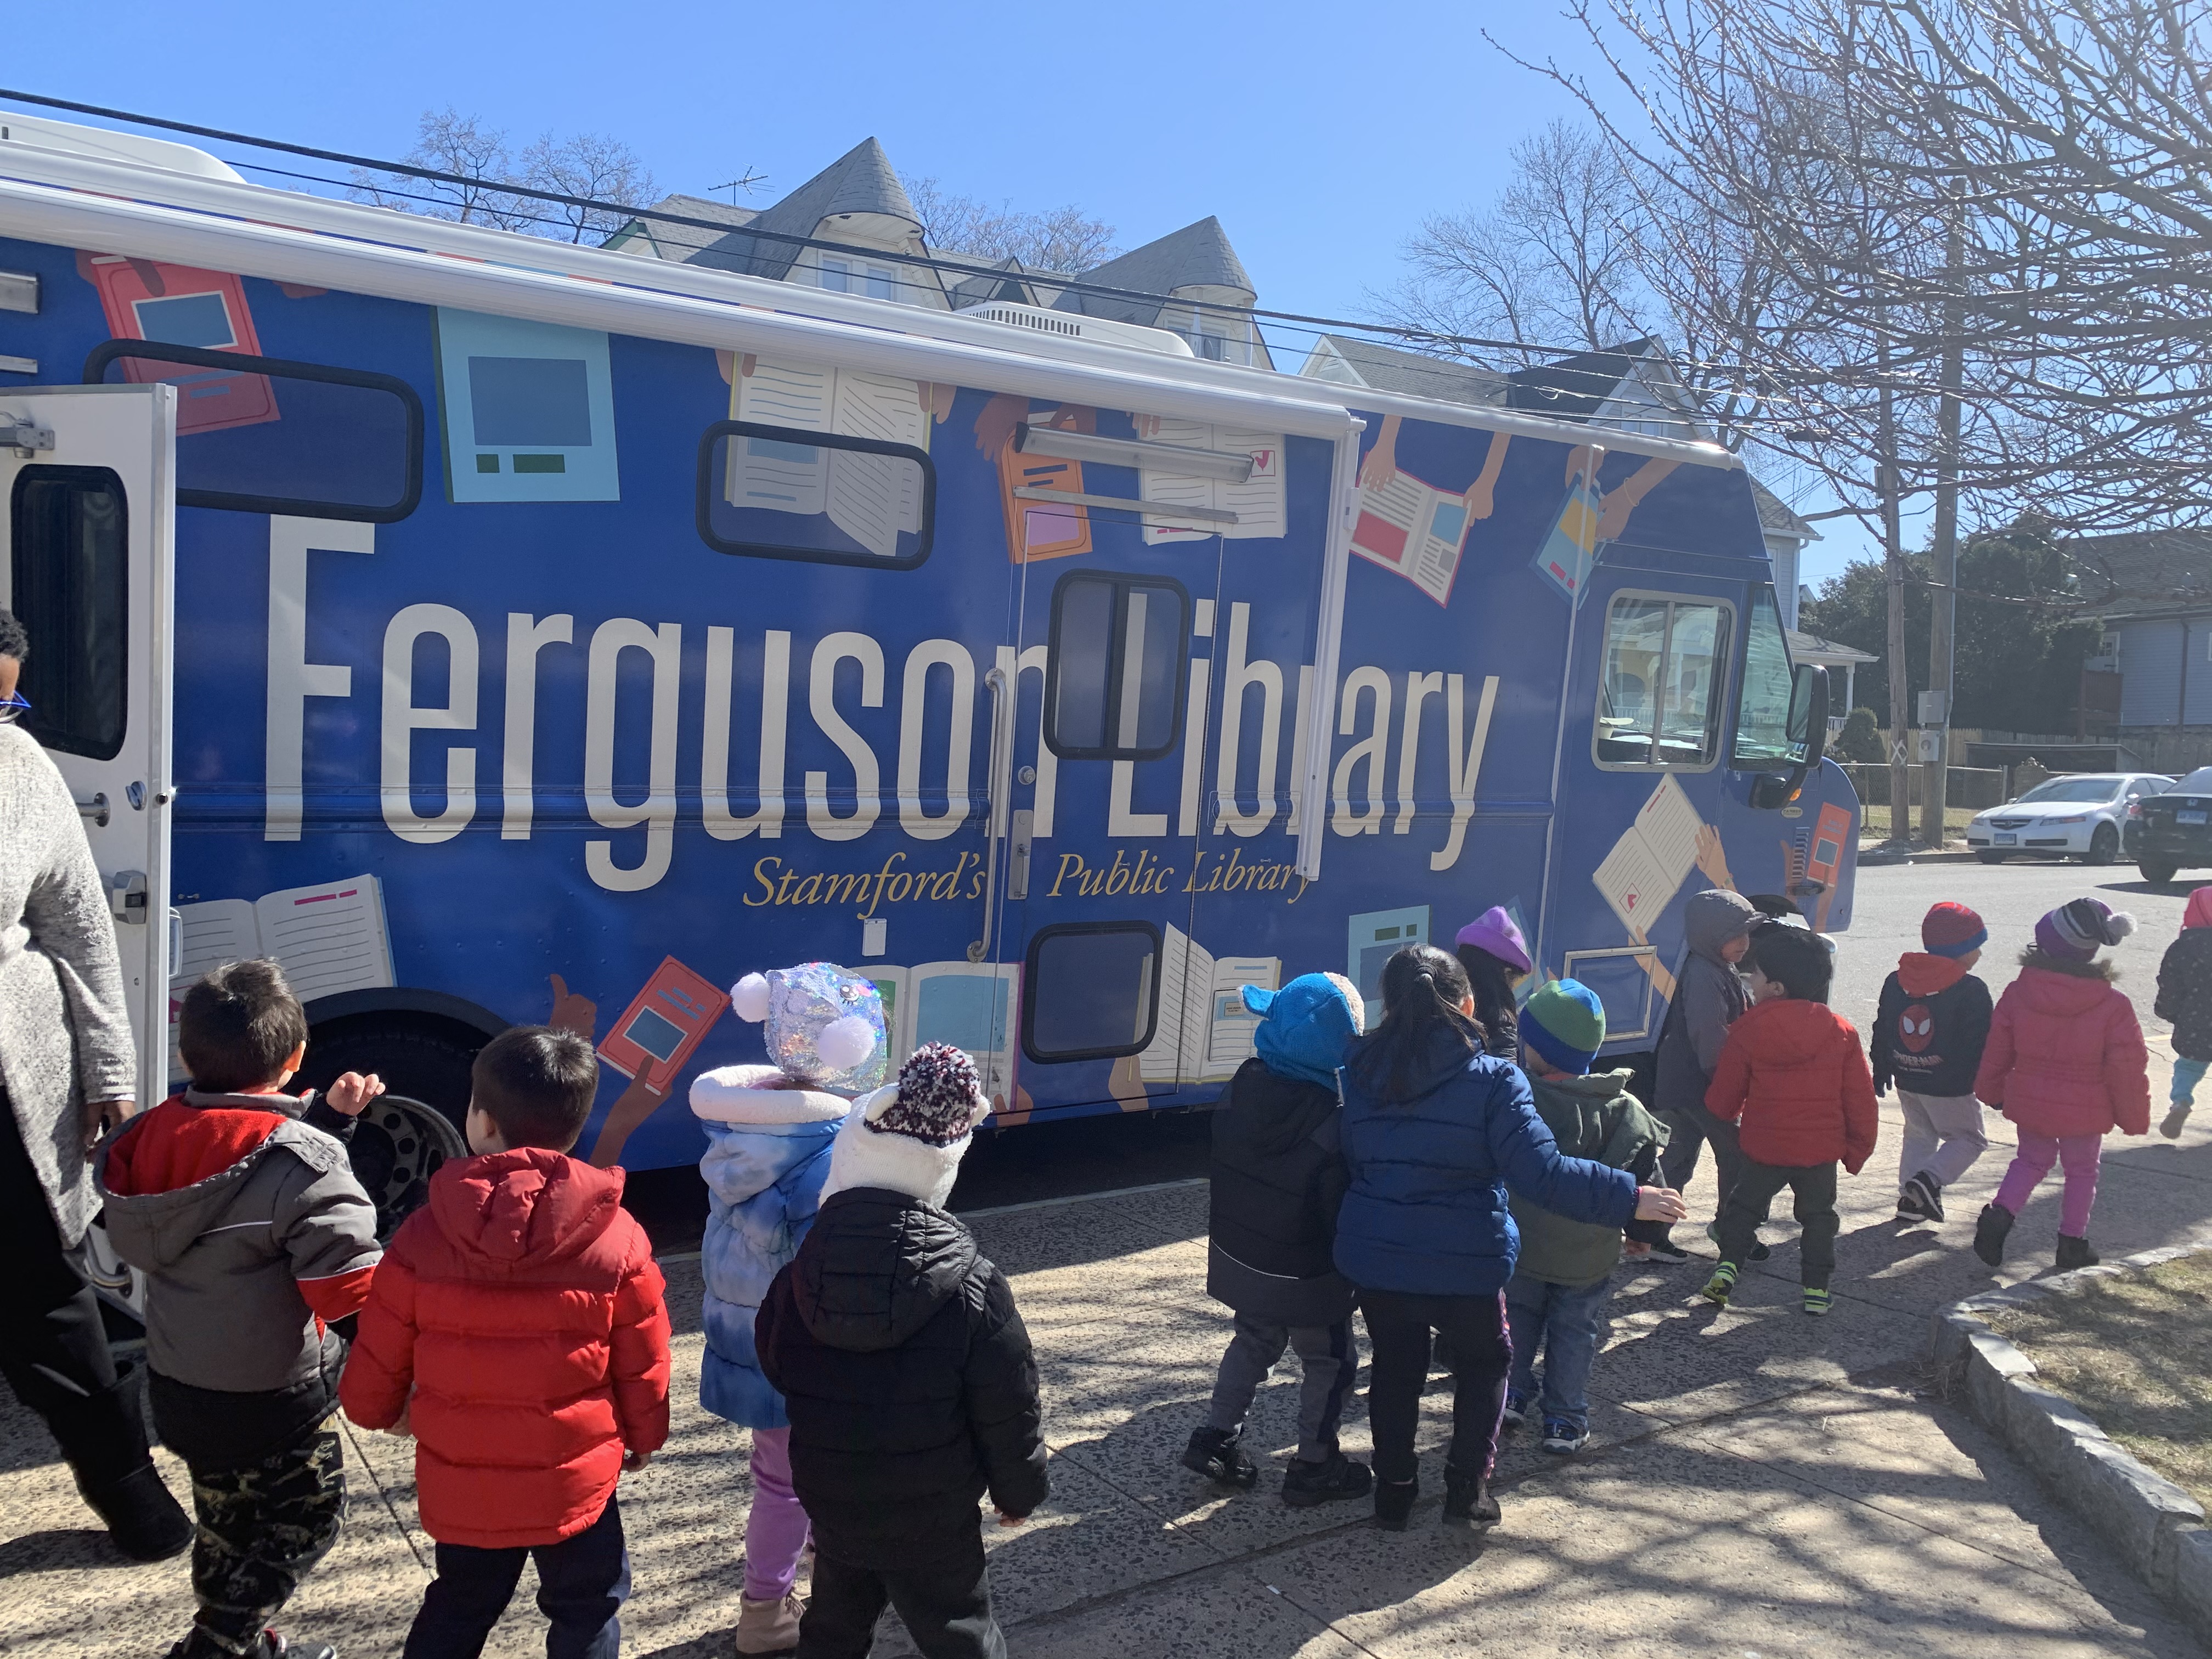 Bookmobile at CLC with kids outside